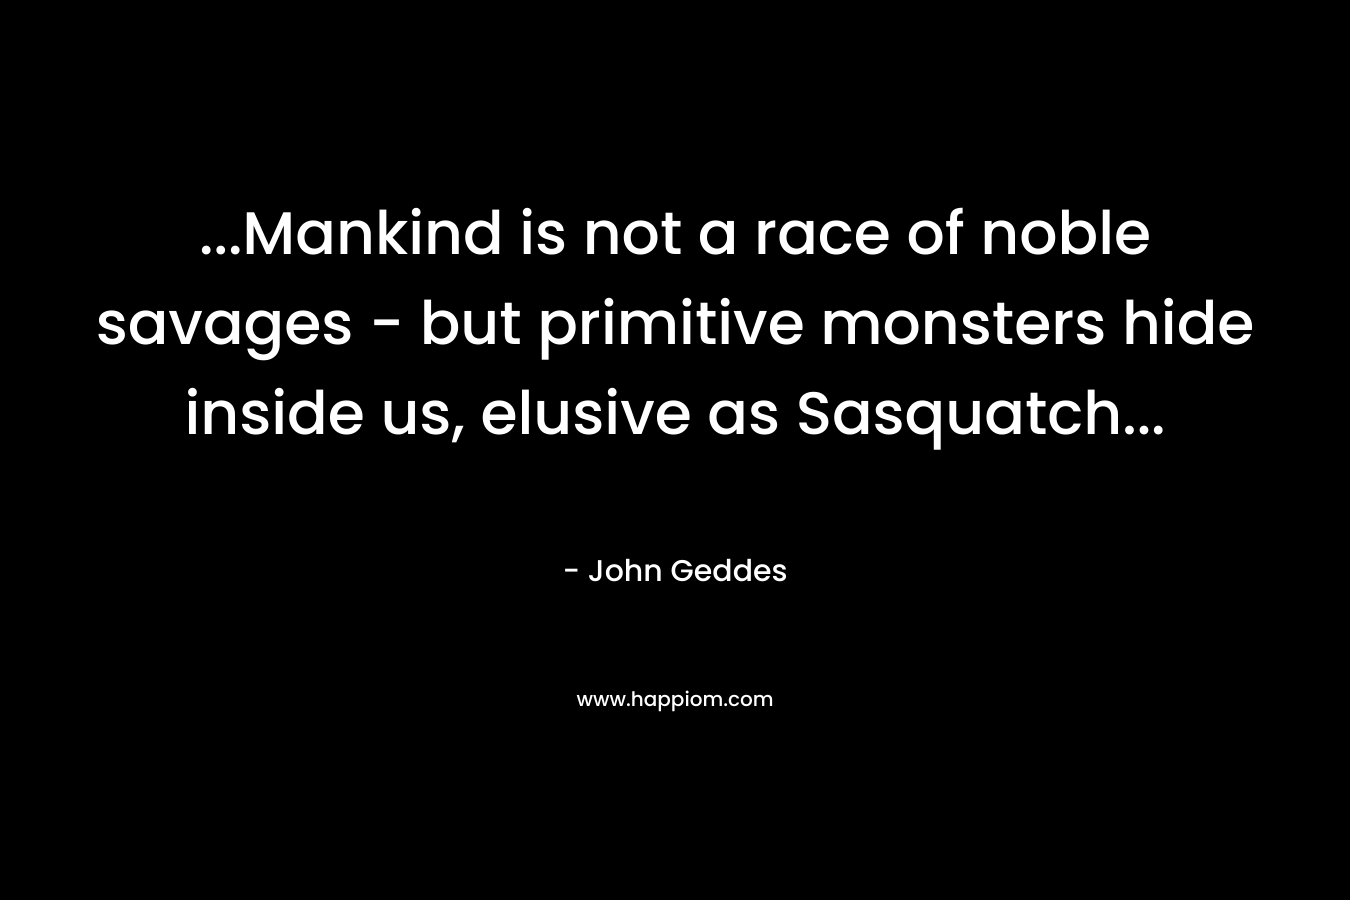 ...Mankind is not a race of noble savages - but primitive monsters hide inside us, elusive as Sasquatch...